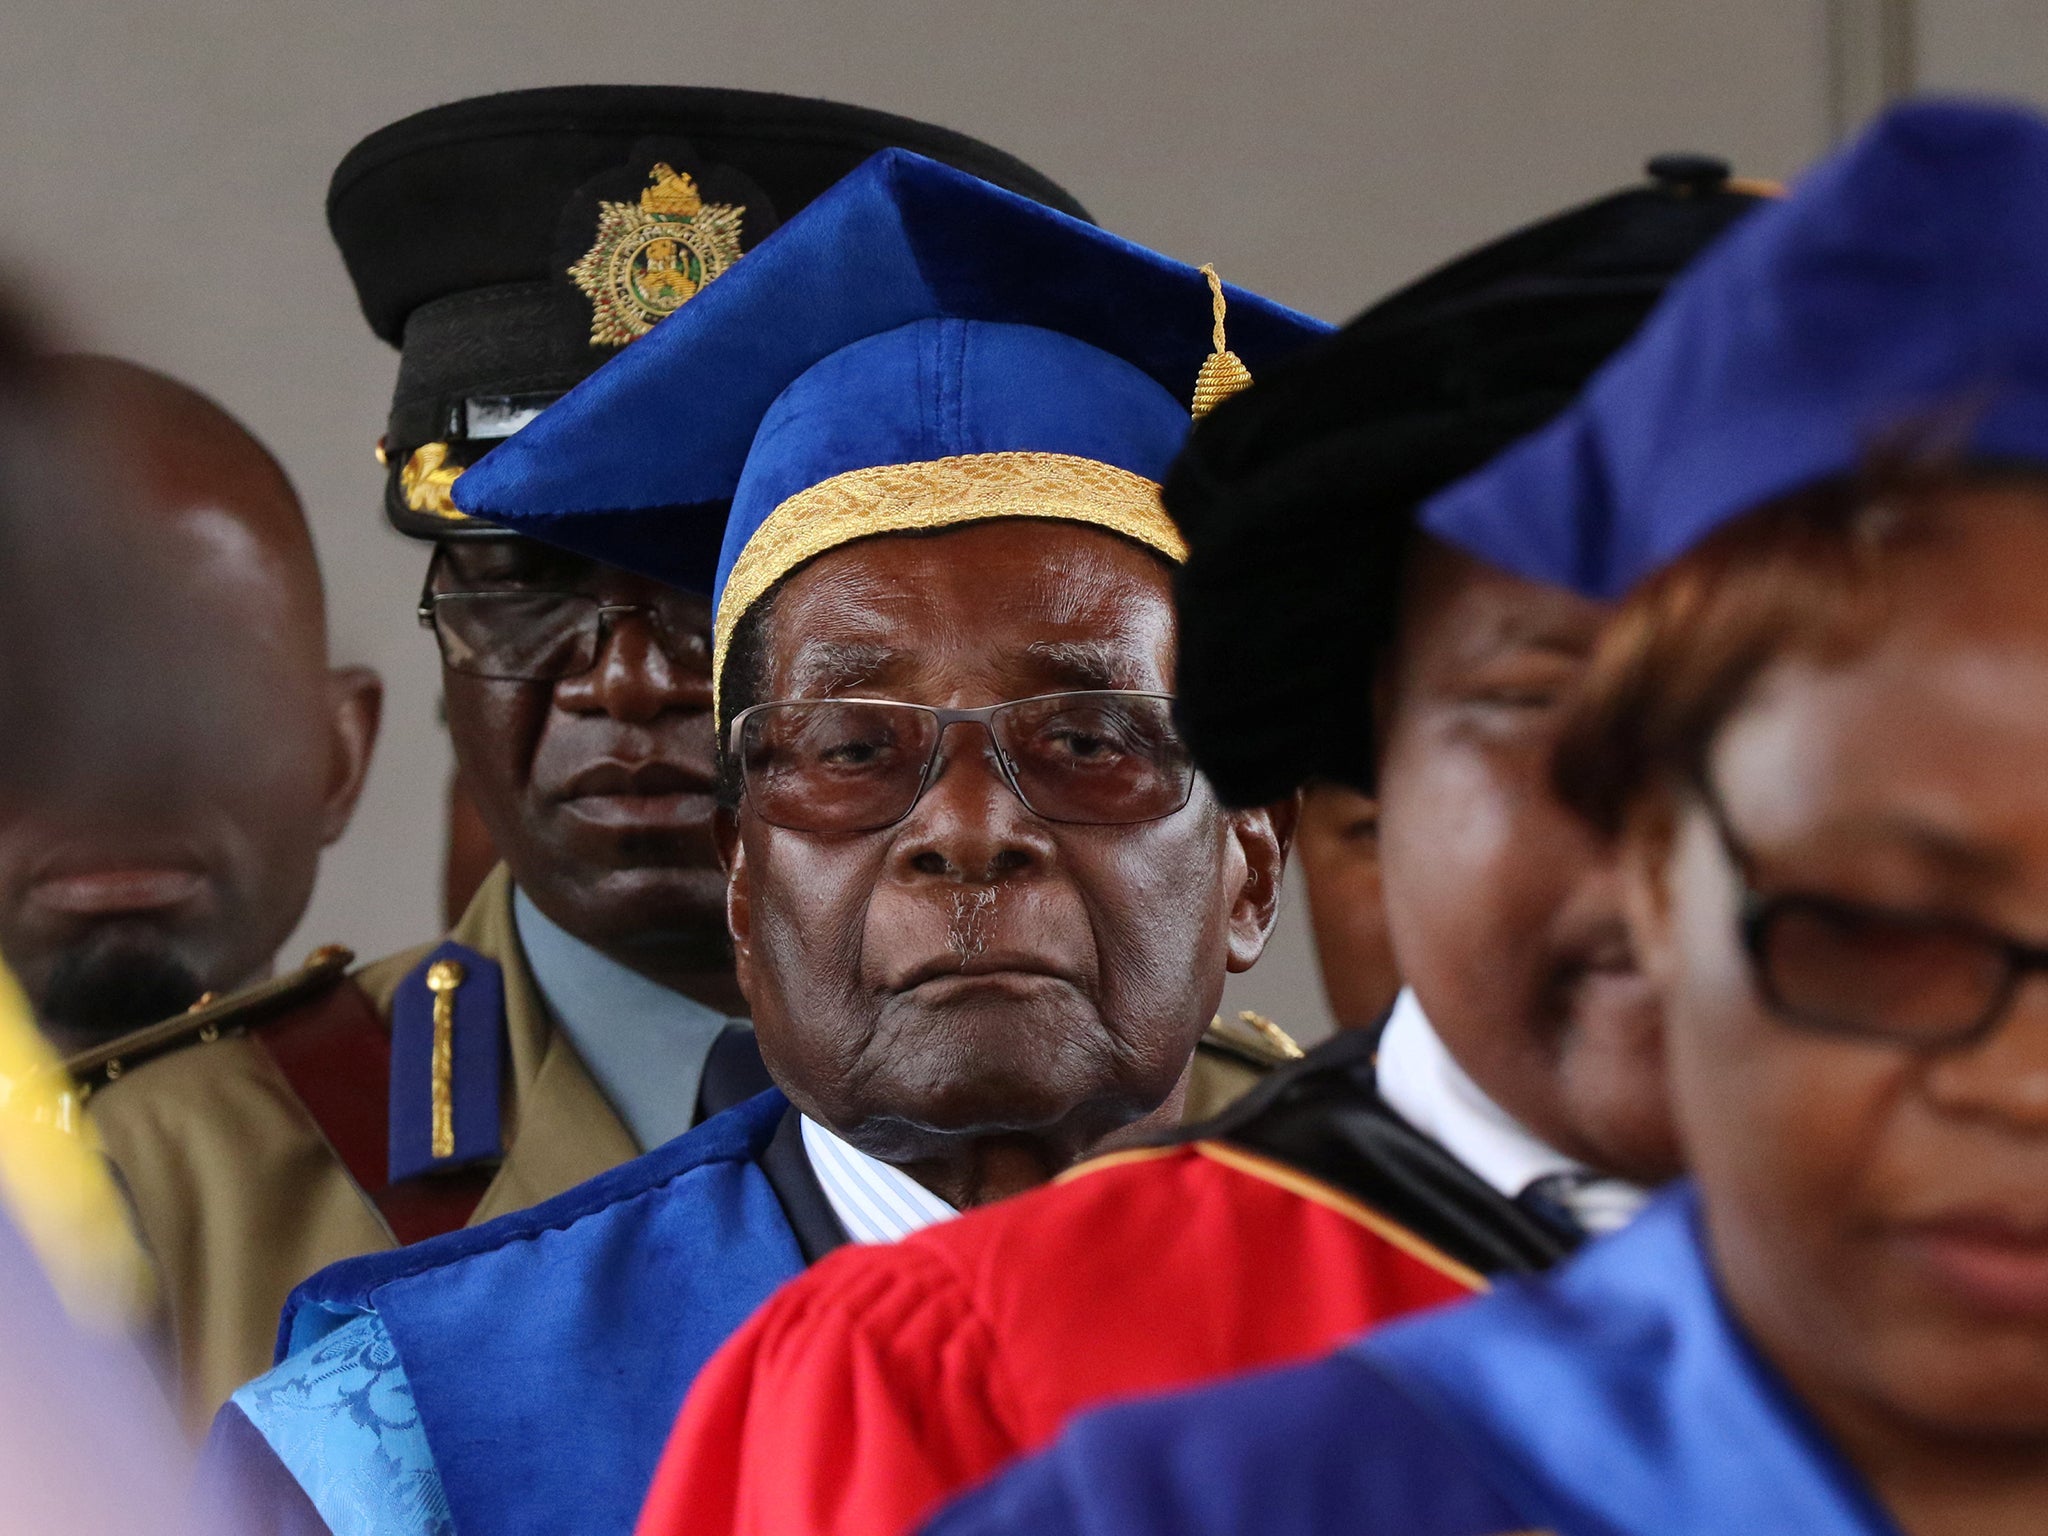 Robert Mugabe attended a university graduation ceremony in Harare while under house arrest (Reuters)